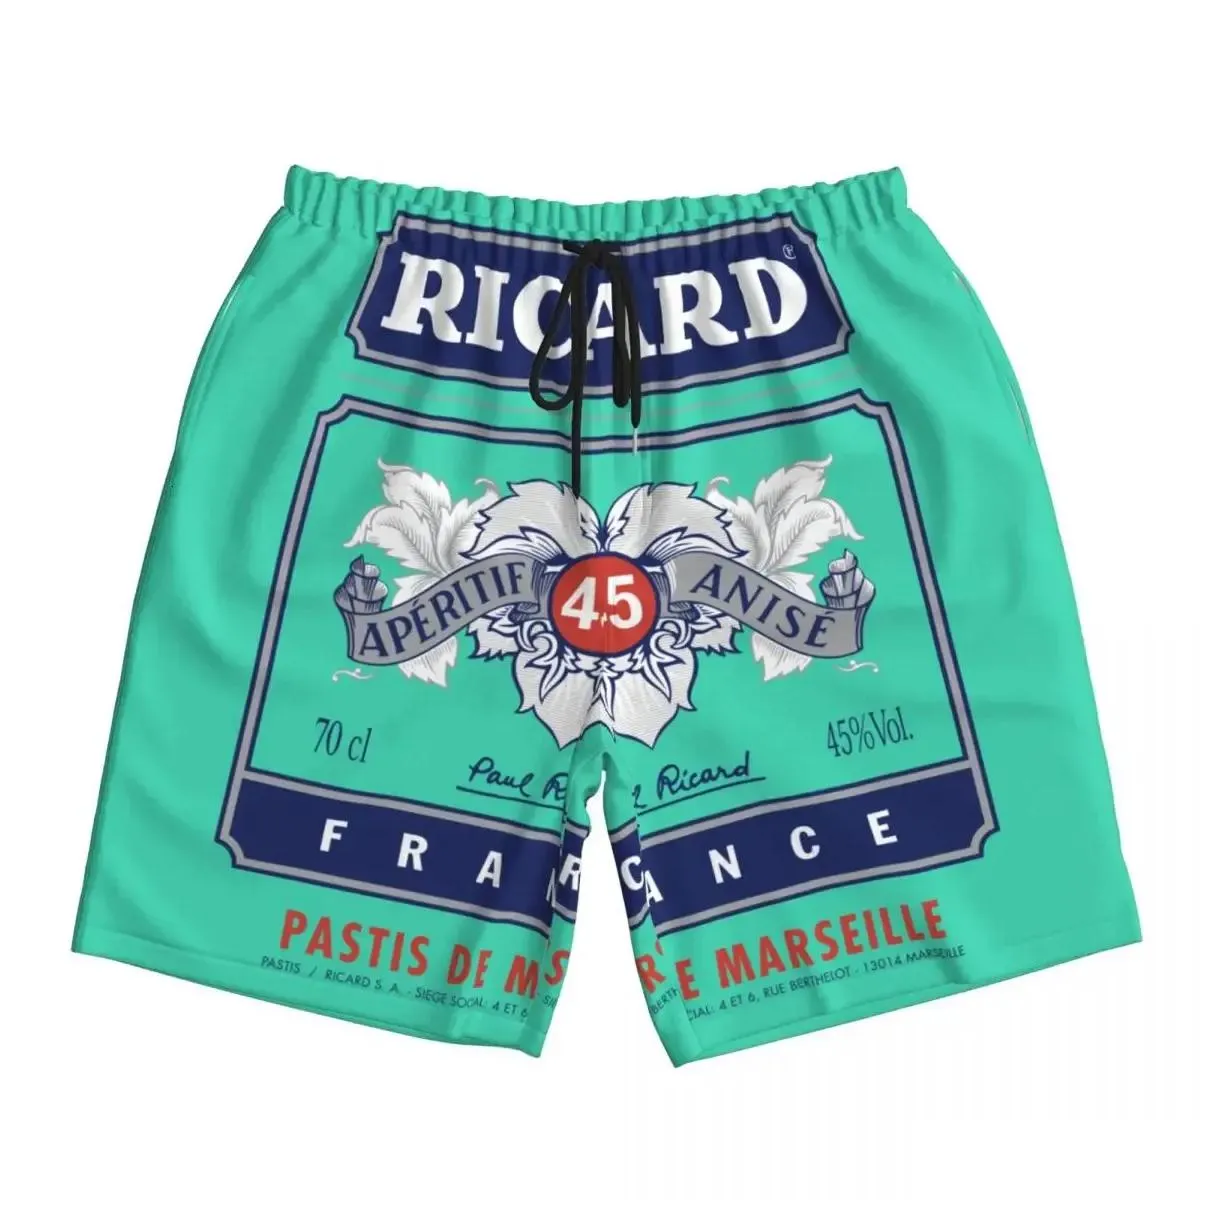 Underpants Summer Beach Pants Ricard Aperitif Anise Board Shorts France Vintage Poster Swimwear Sunga Boxer Briefs 240129 Drop Delive Dhyfx